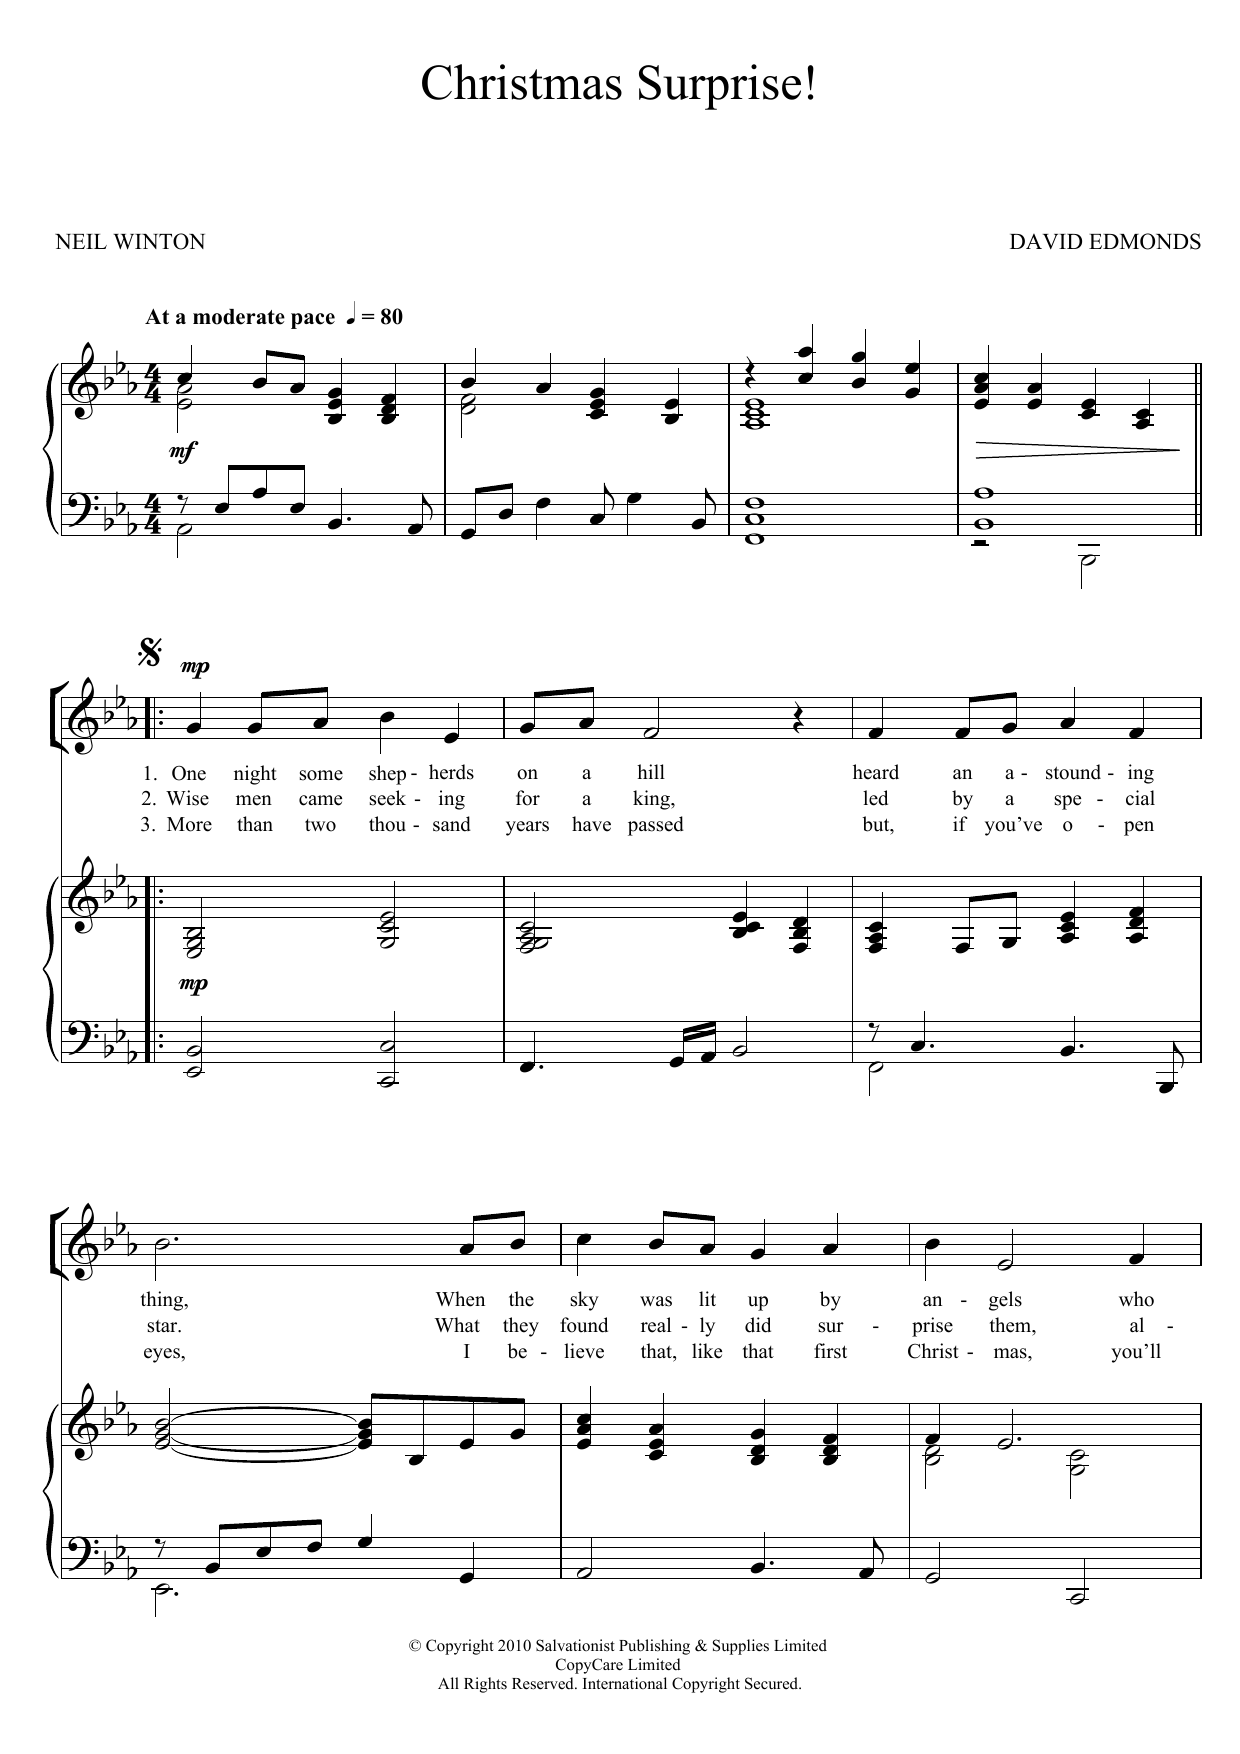 Download The Salvation Army Christmas Surprise! Sheet Music